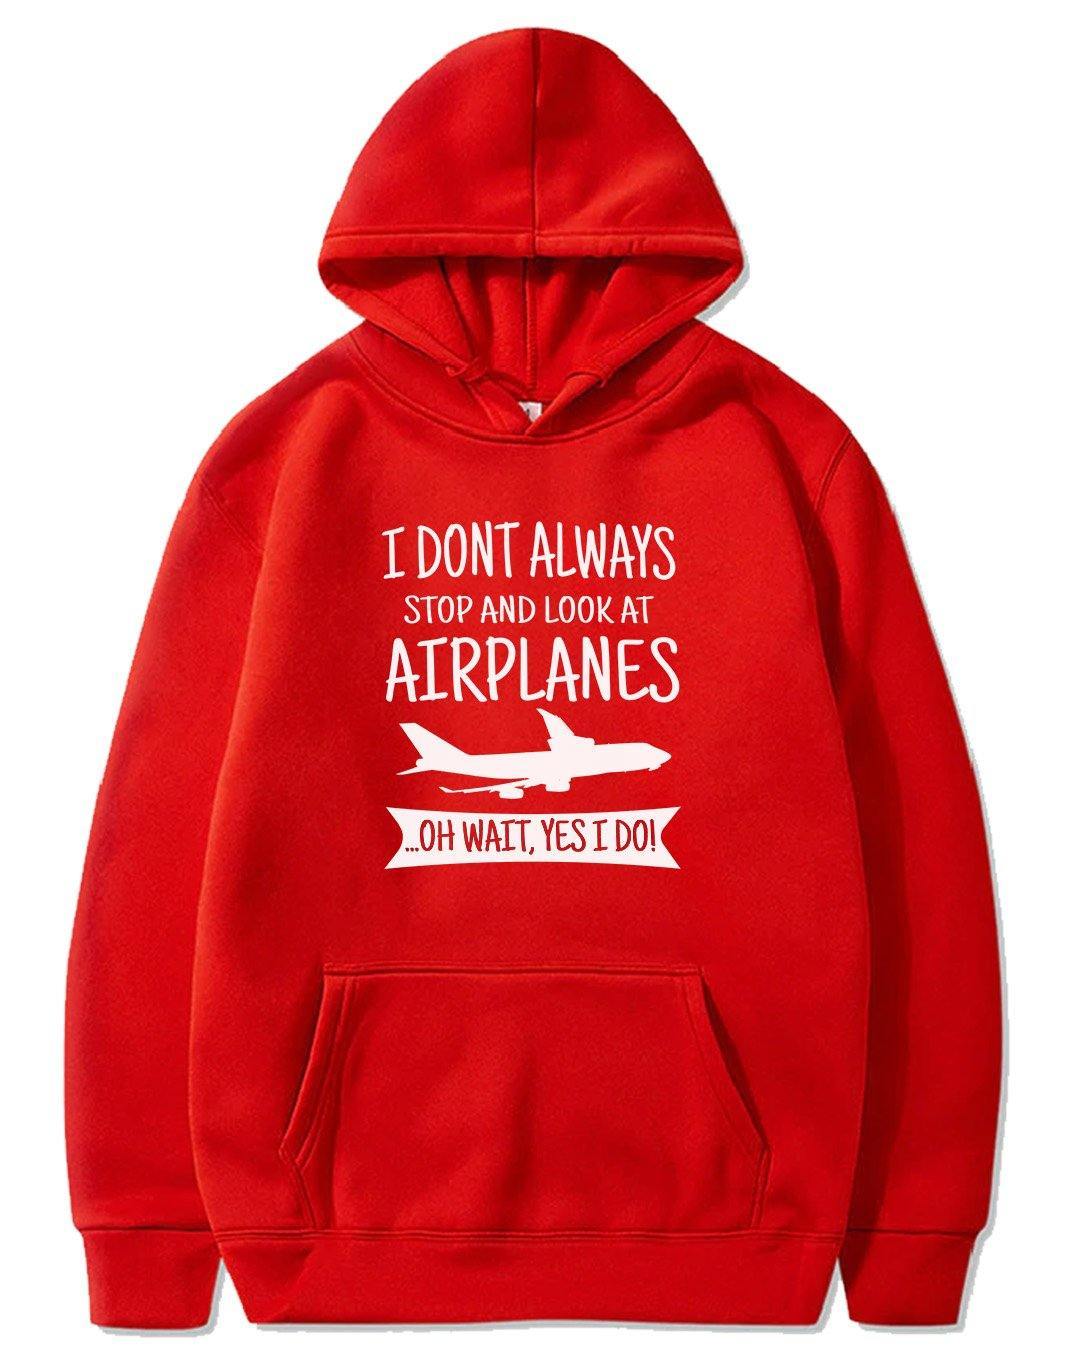 I DON'T ALWAYS STOP AND LOOK AT AIRPLANES,YES I DO T-SHIRT PULLOVER THE AV8R